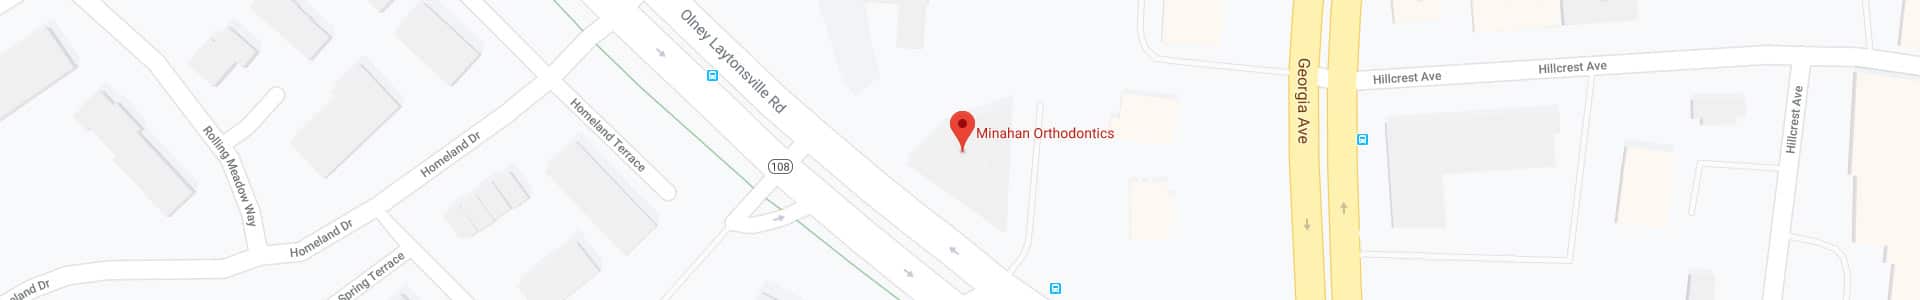 Footer Map Minahan Orthodontics in Olney, MD